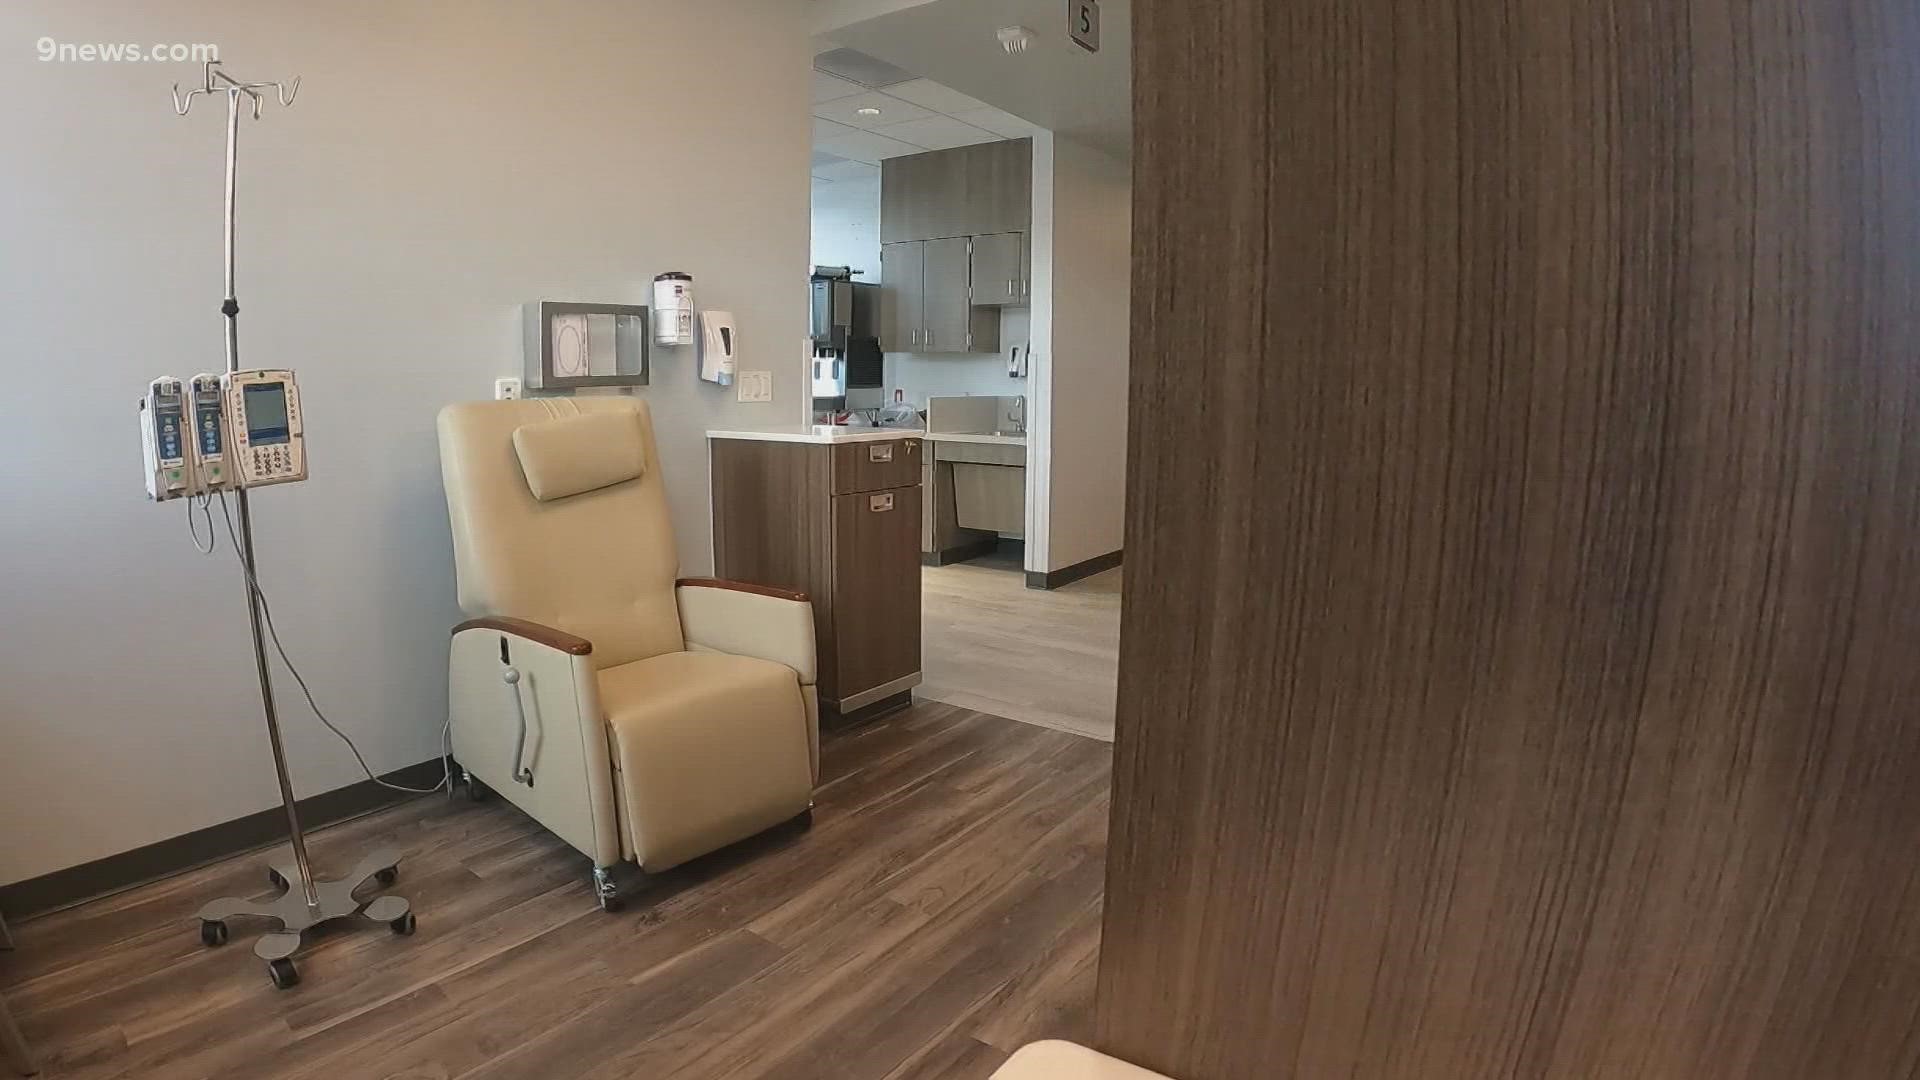 Vail Health’s new $70 million dollar Dillon Health Center offers cancer care, family medicine, urgent care, physical therapy, cardiovascular care and more.